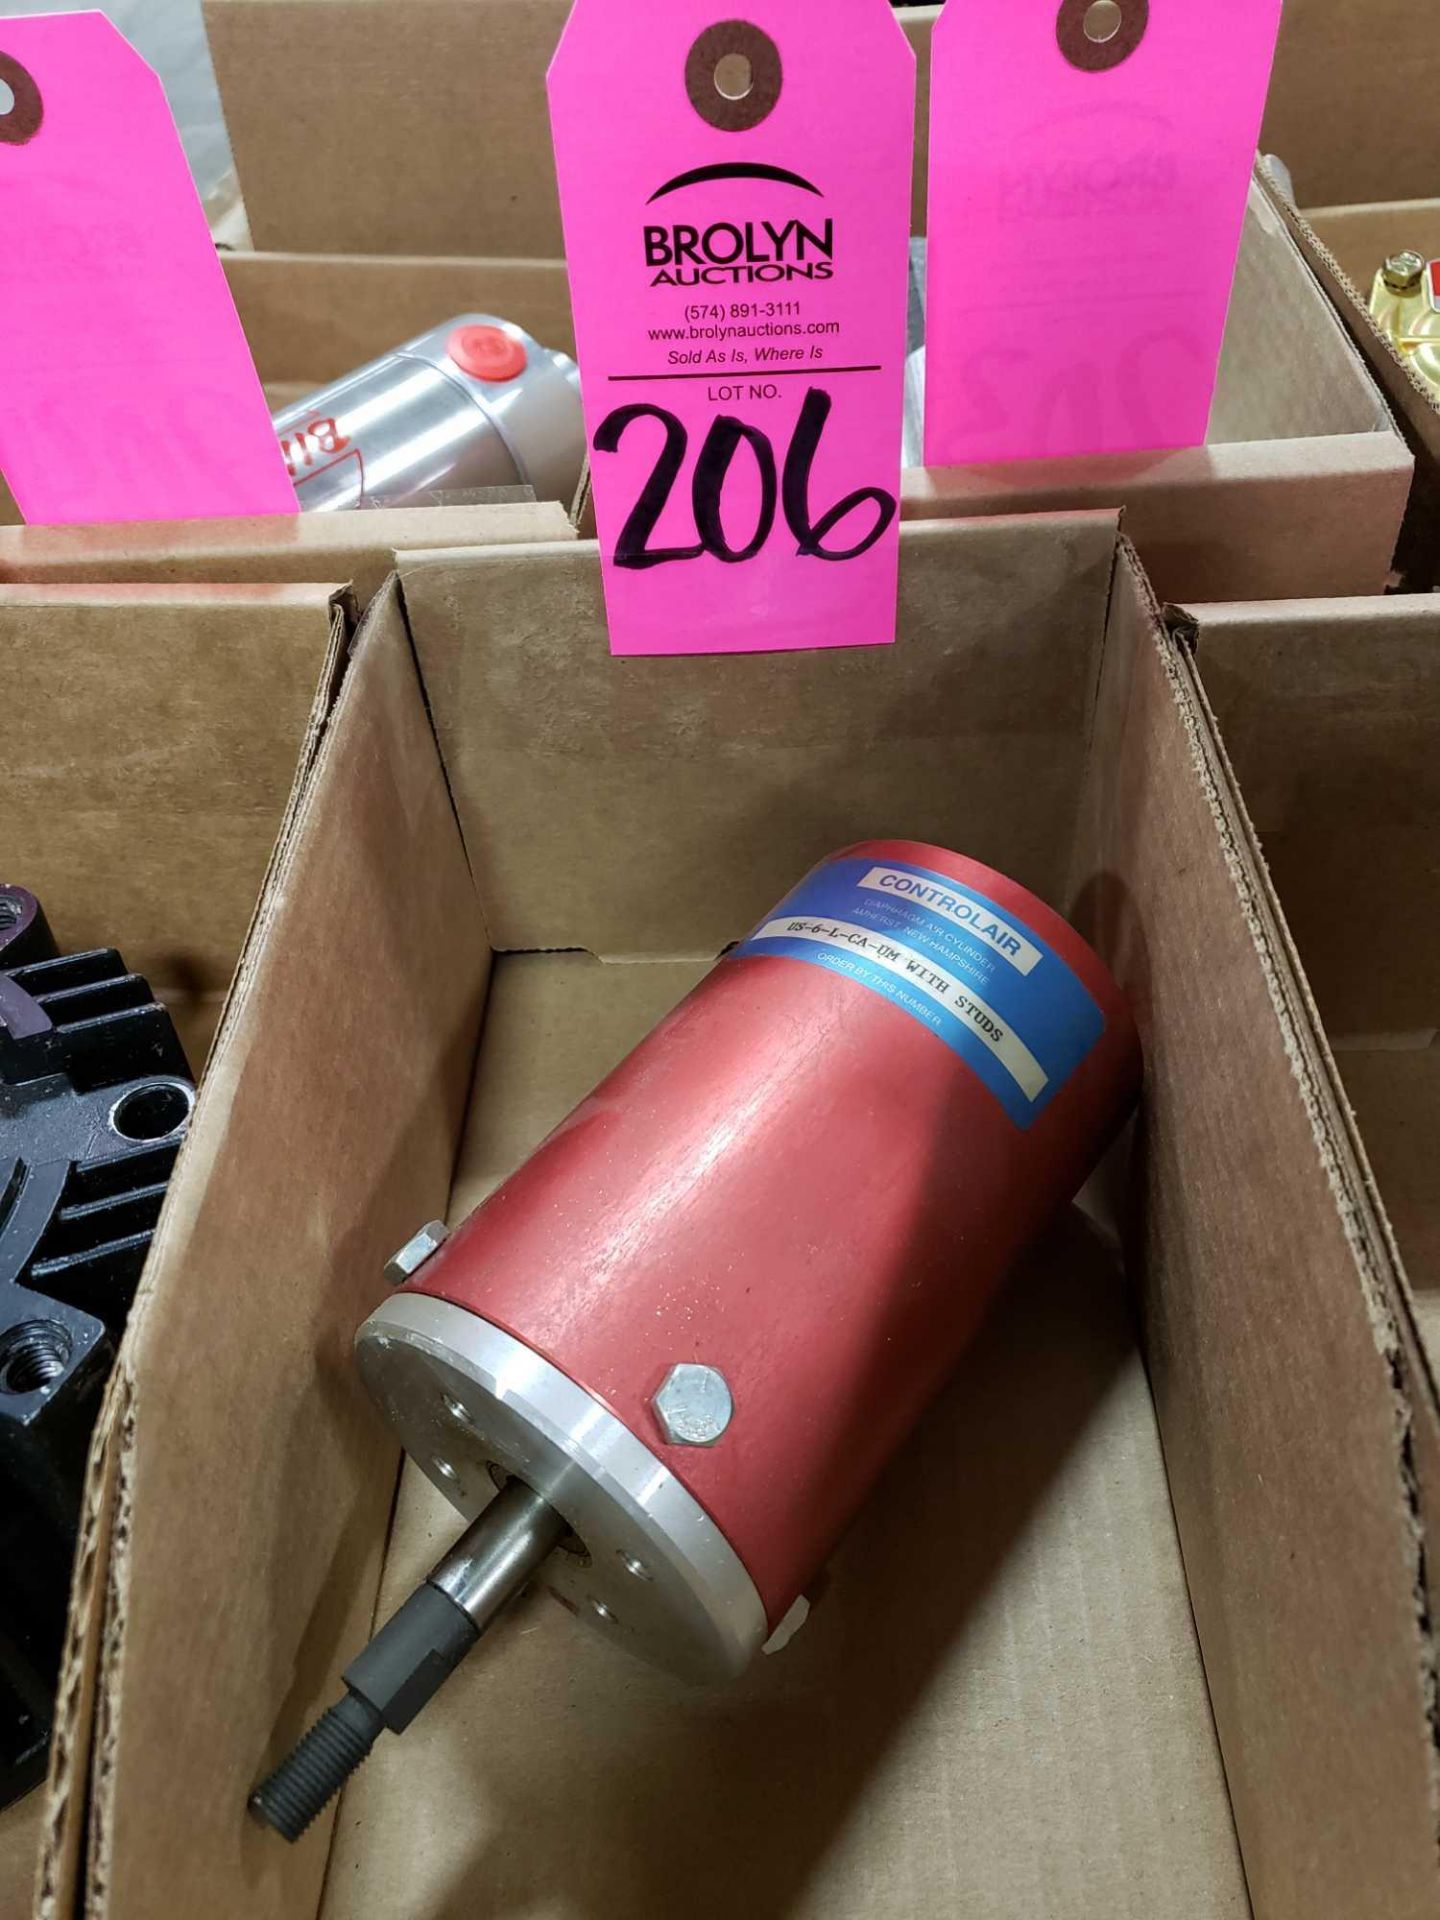 Controlair diaphragm air cylinder. Model US-6-L-CA-UM. New as pictured.